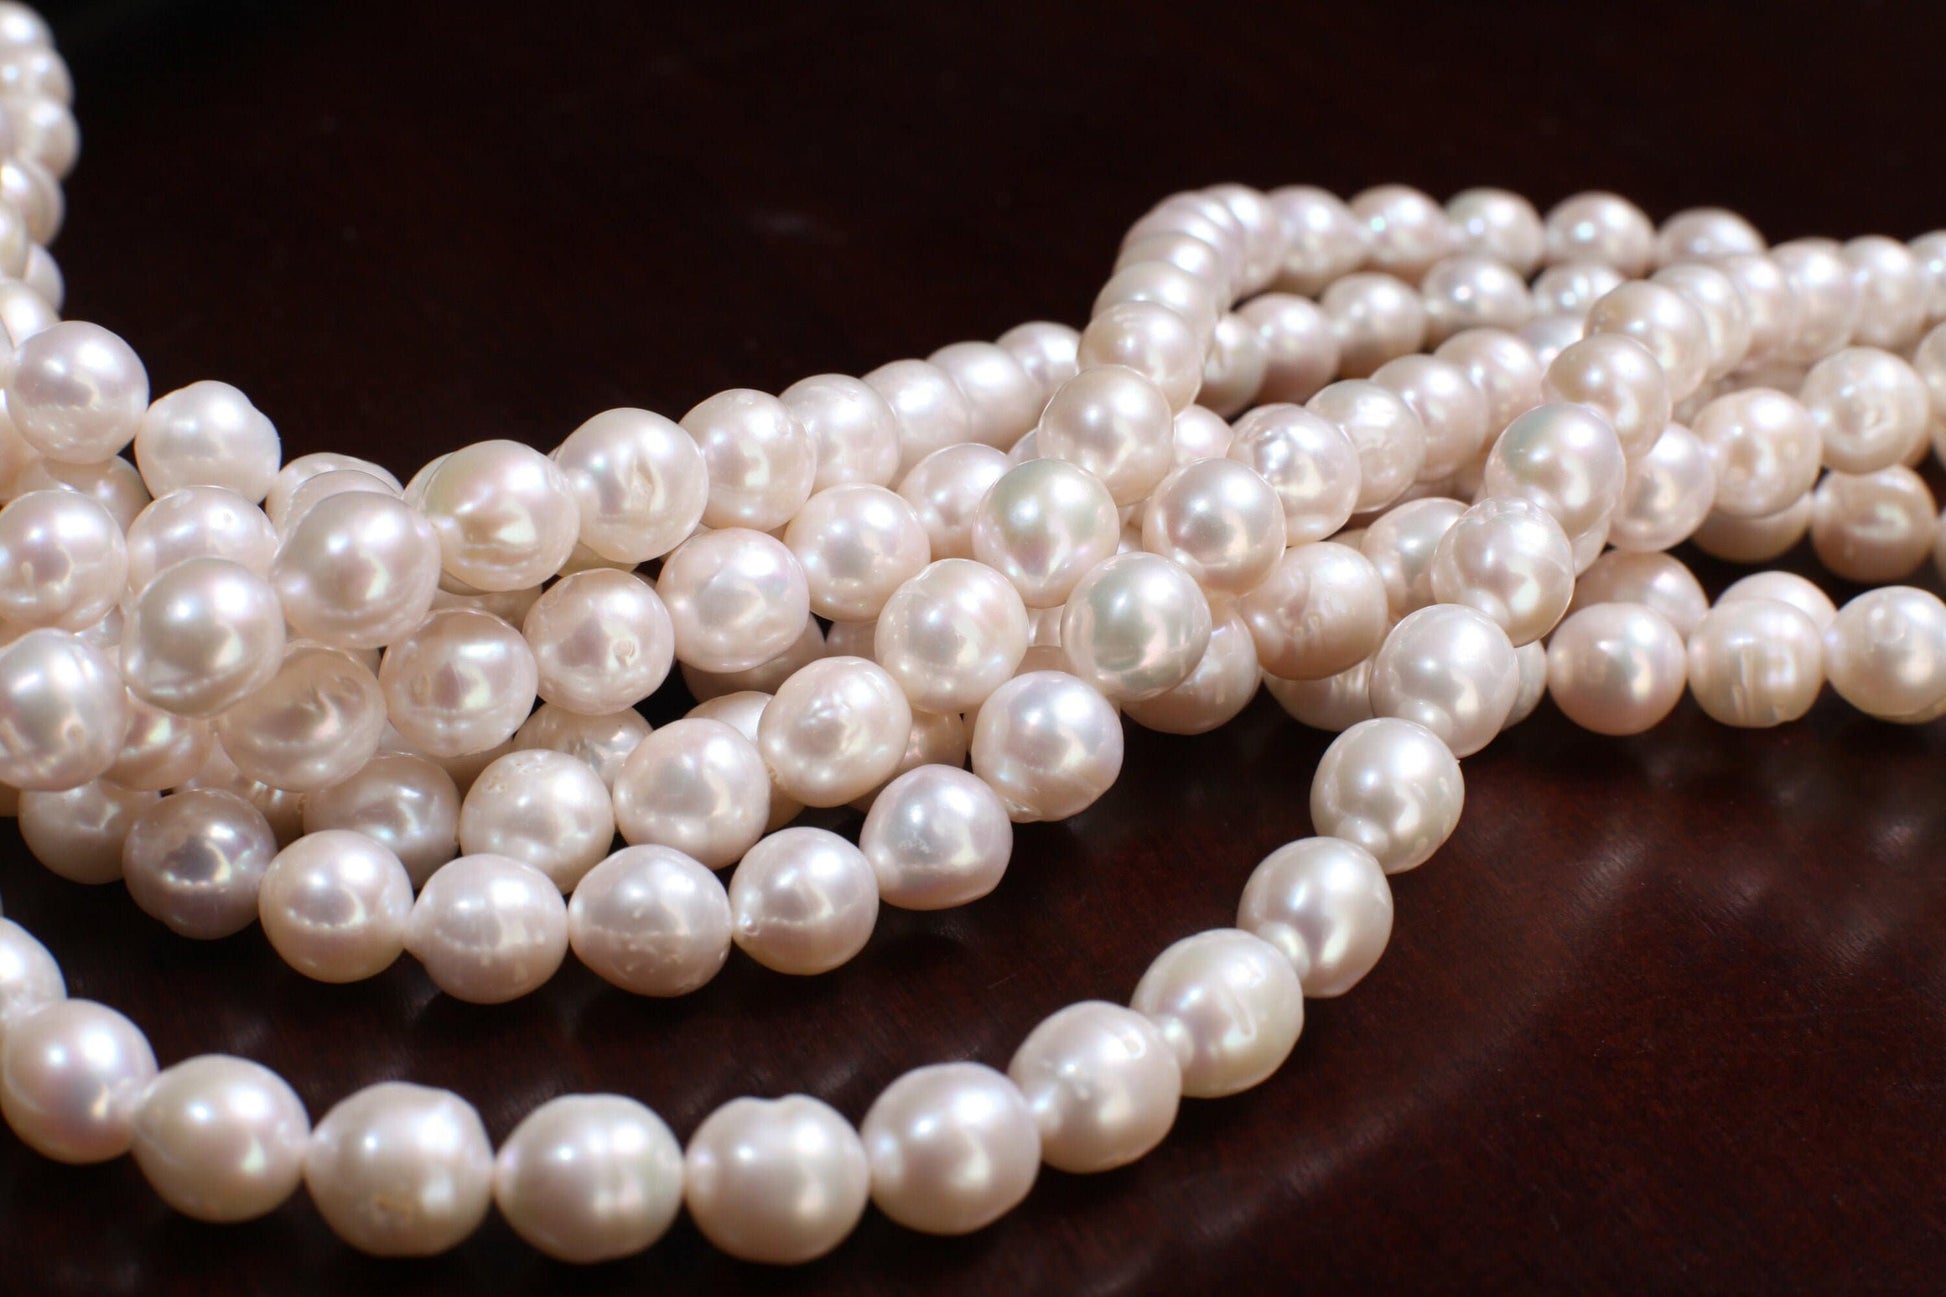 Natural Freshwater Pearl 7-7.5mm Potato round Pearl, Good Luster 15&quot; strand for Jewelry Making Pearl , Bracelet, Earrings, Necklace